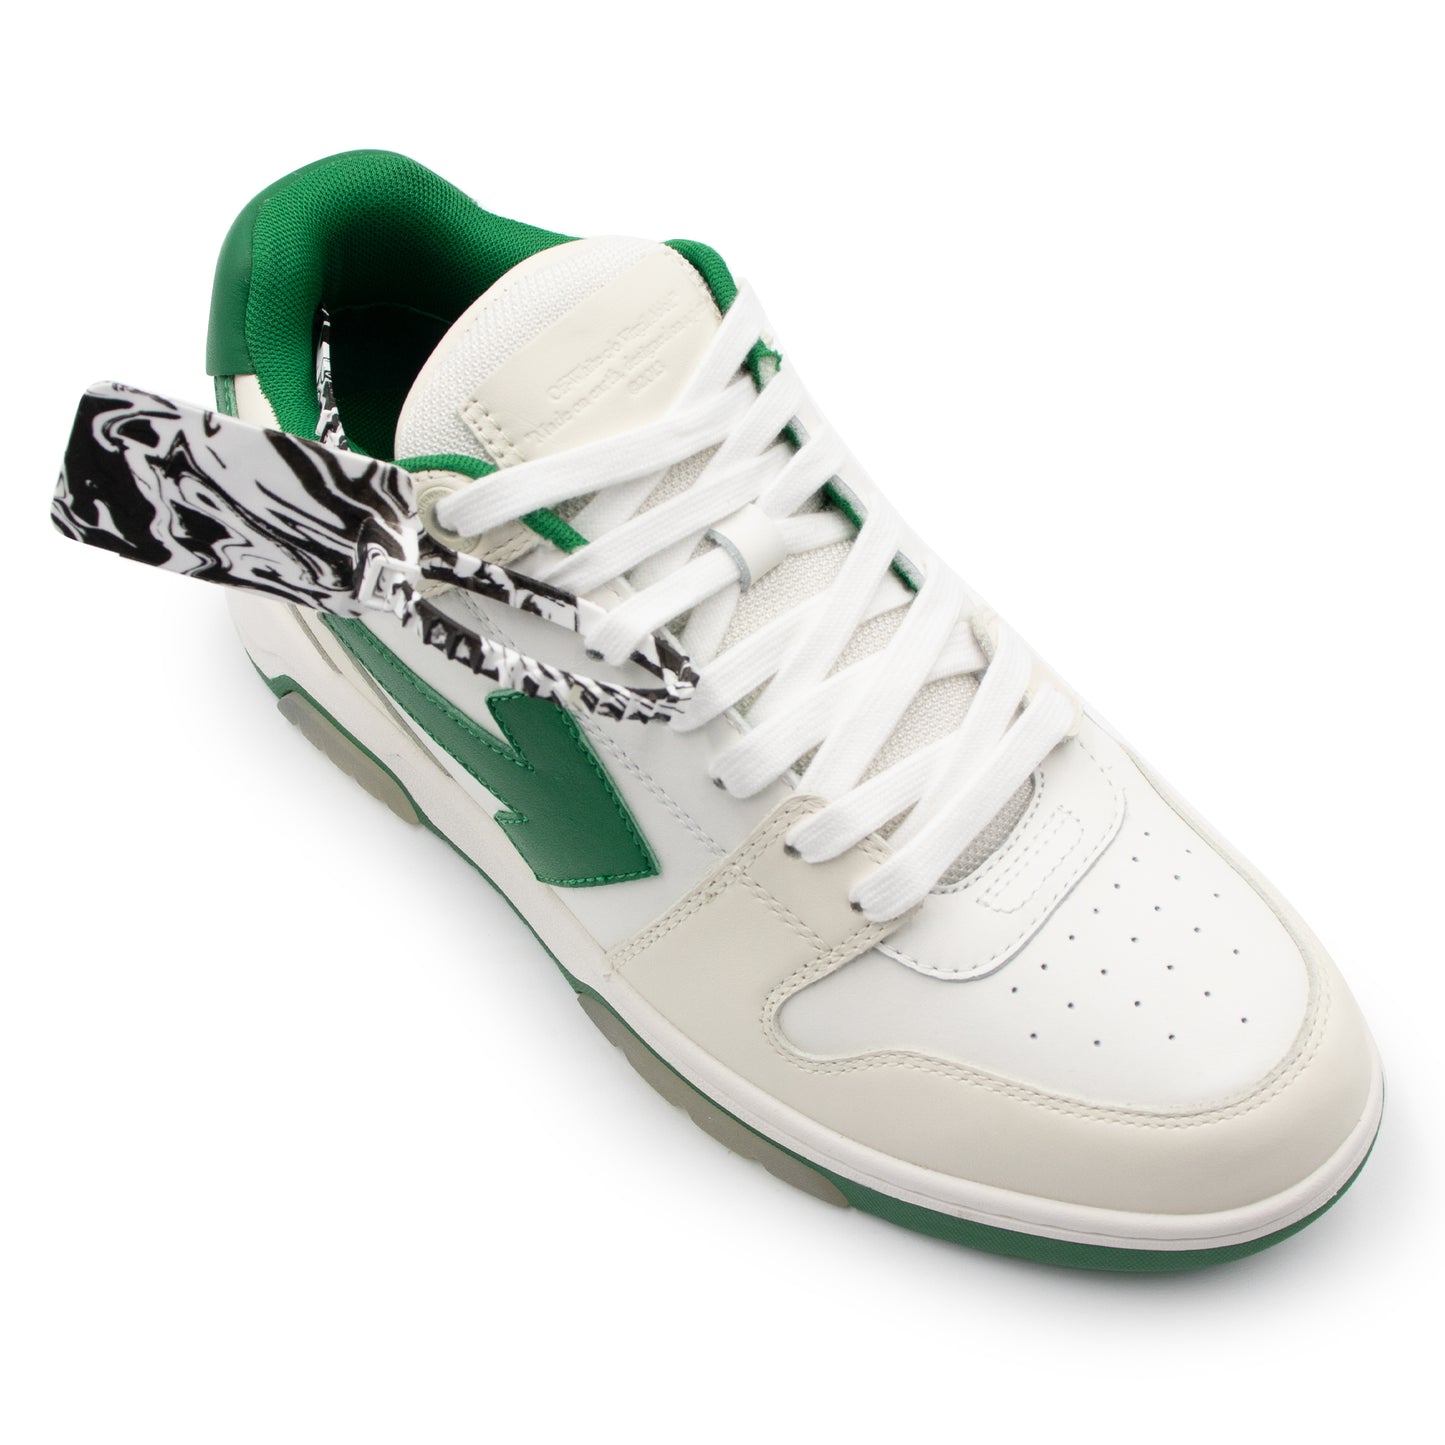 Out Of Office Calf Leather Sneaker in White Green